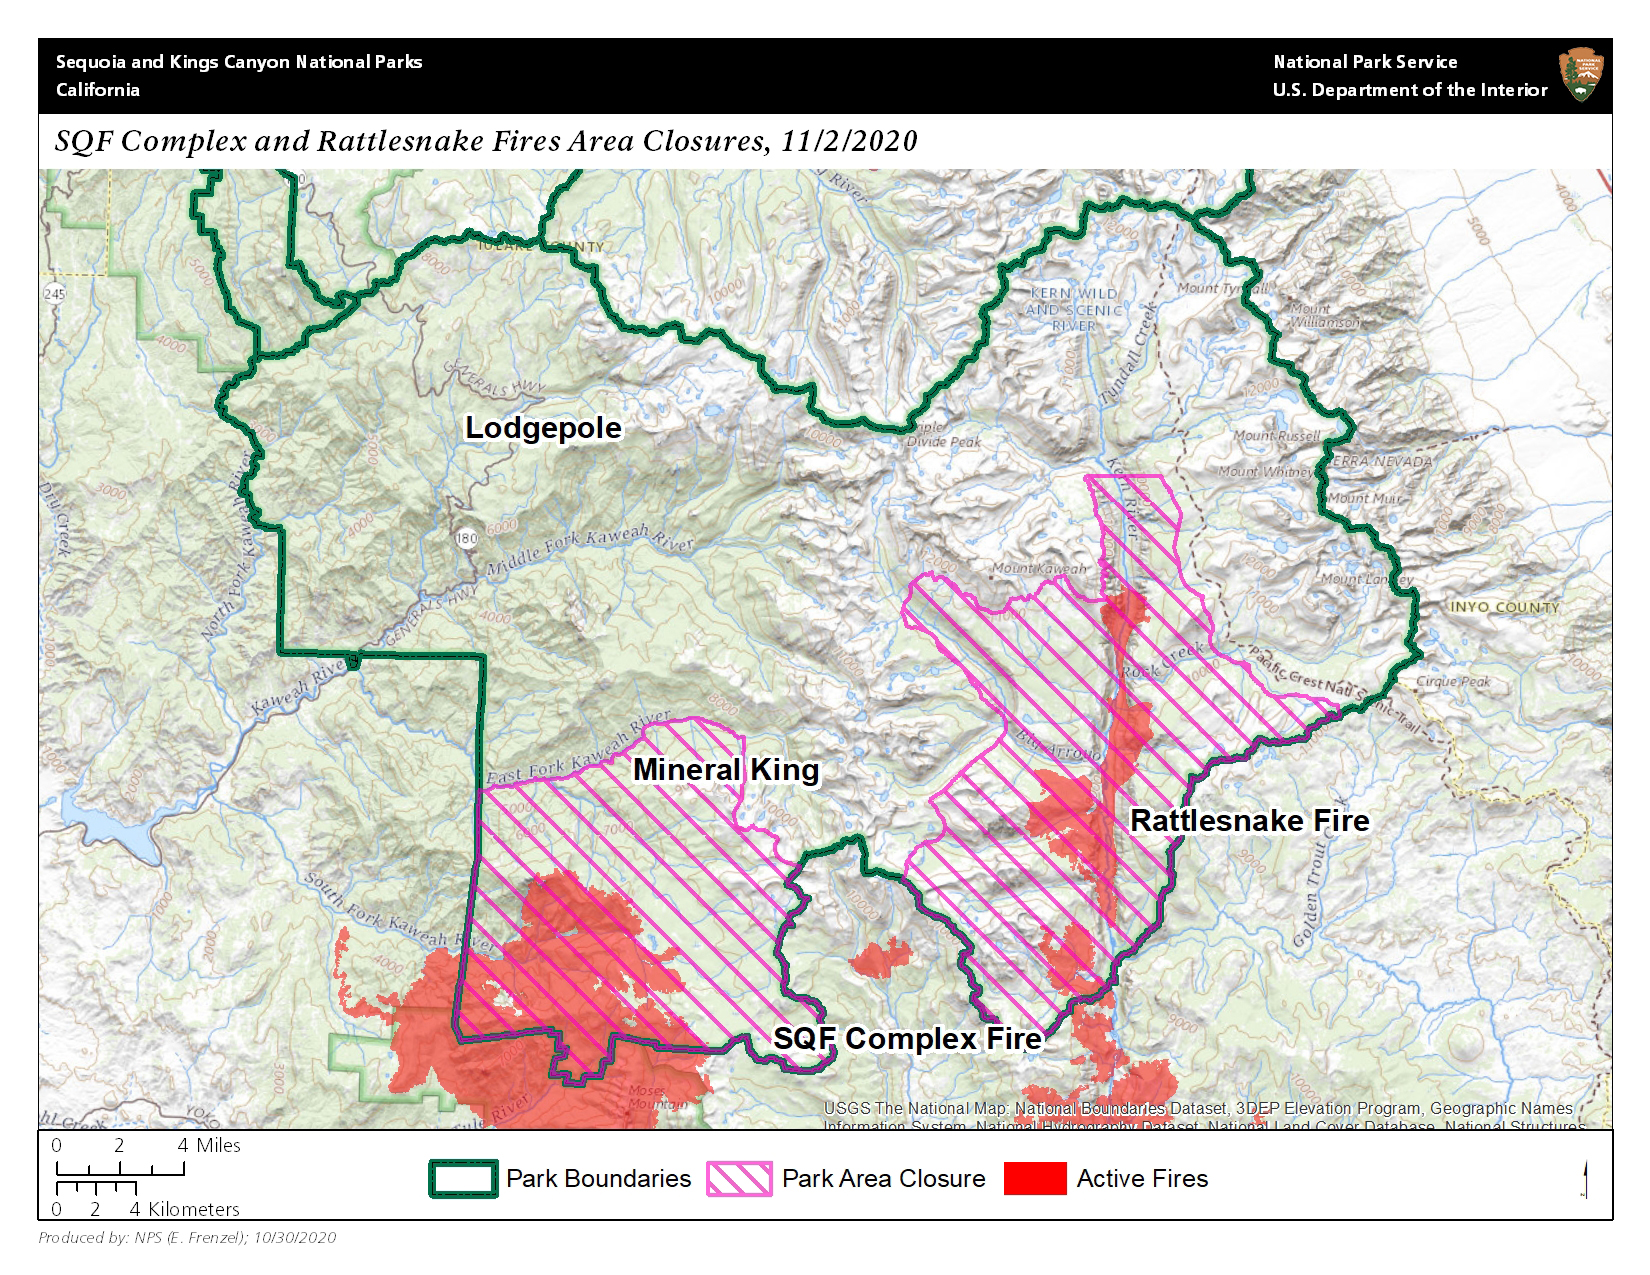 A closure map for the southern part of Sequoia National Park. The closed areas are fuchsia colored and hashed, the map is mostly green background, and the red areas are the fires' perimeter.